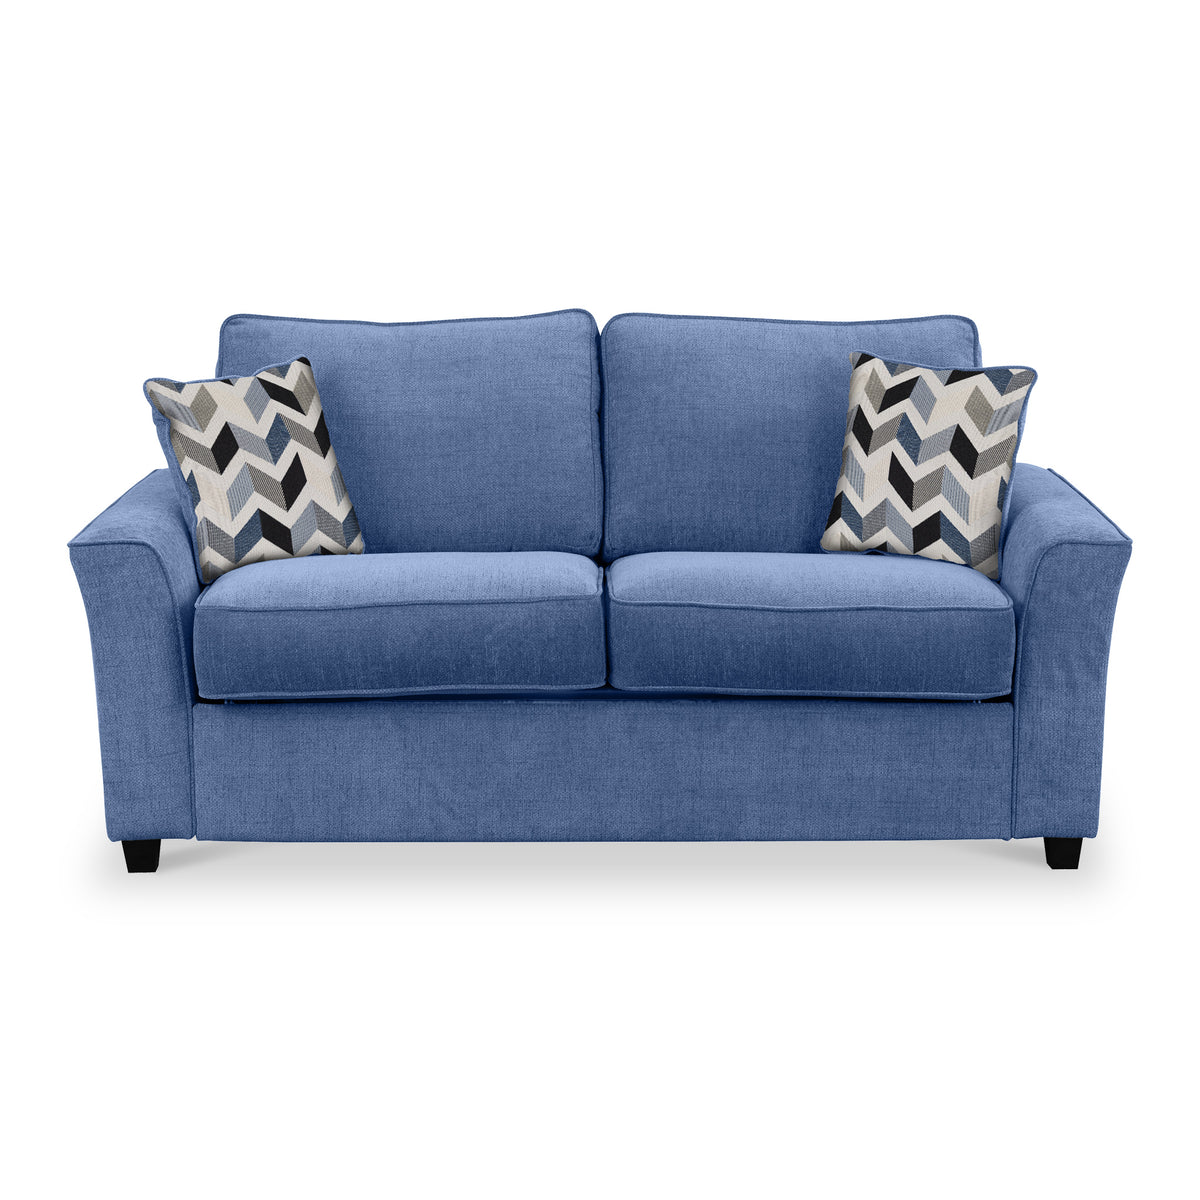 Abbott 2 Seater Sofabed in Denim with Morelisa Denim Cushions by Roseland Furniture